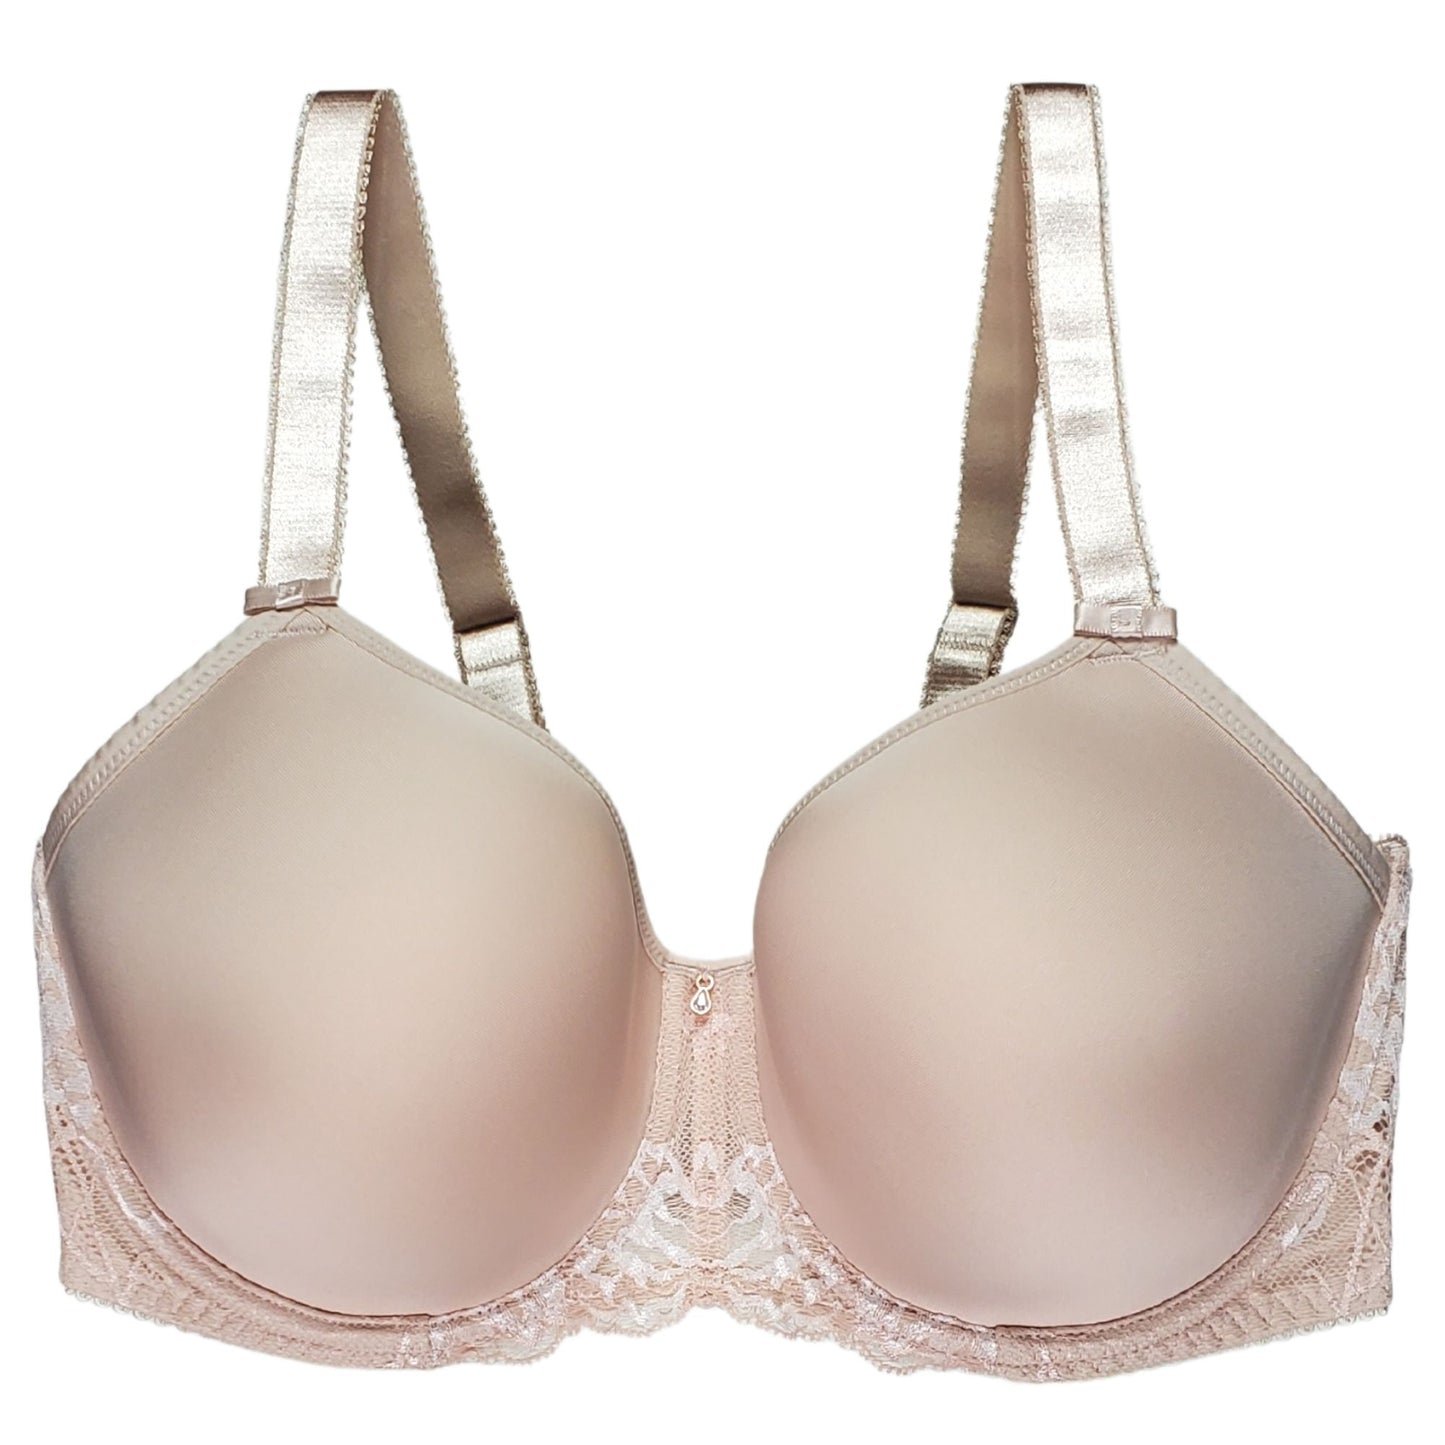 Full Busted Figure Types in 32HH Bra Size Fawn Convertible Bras